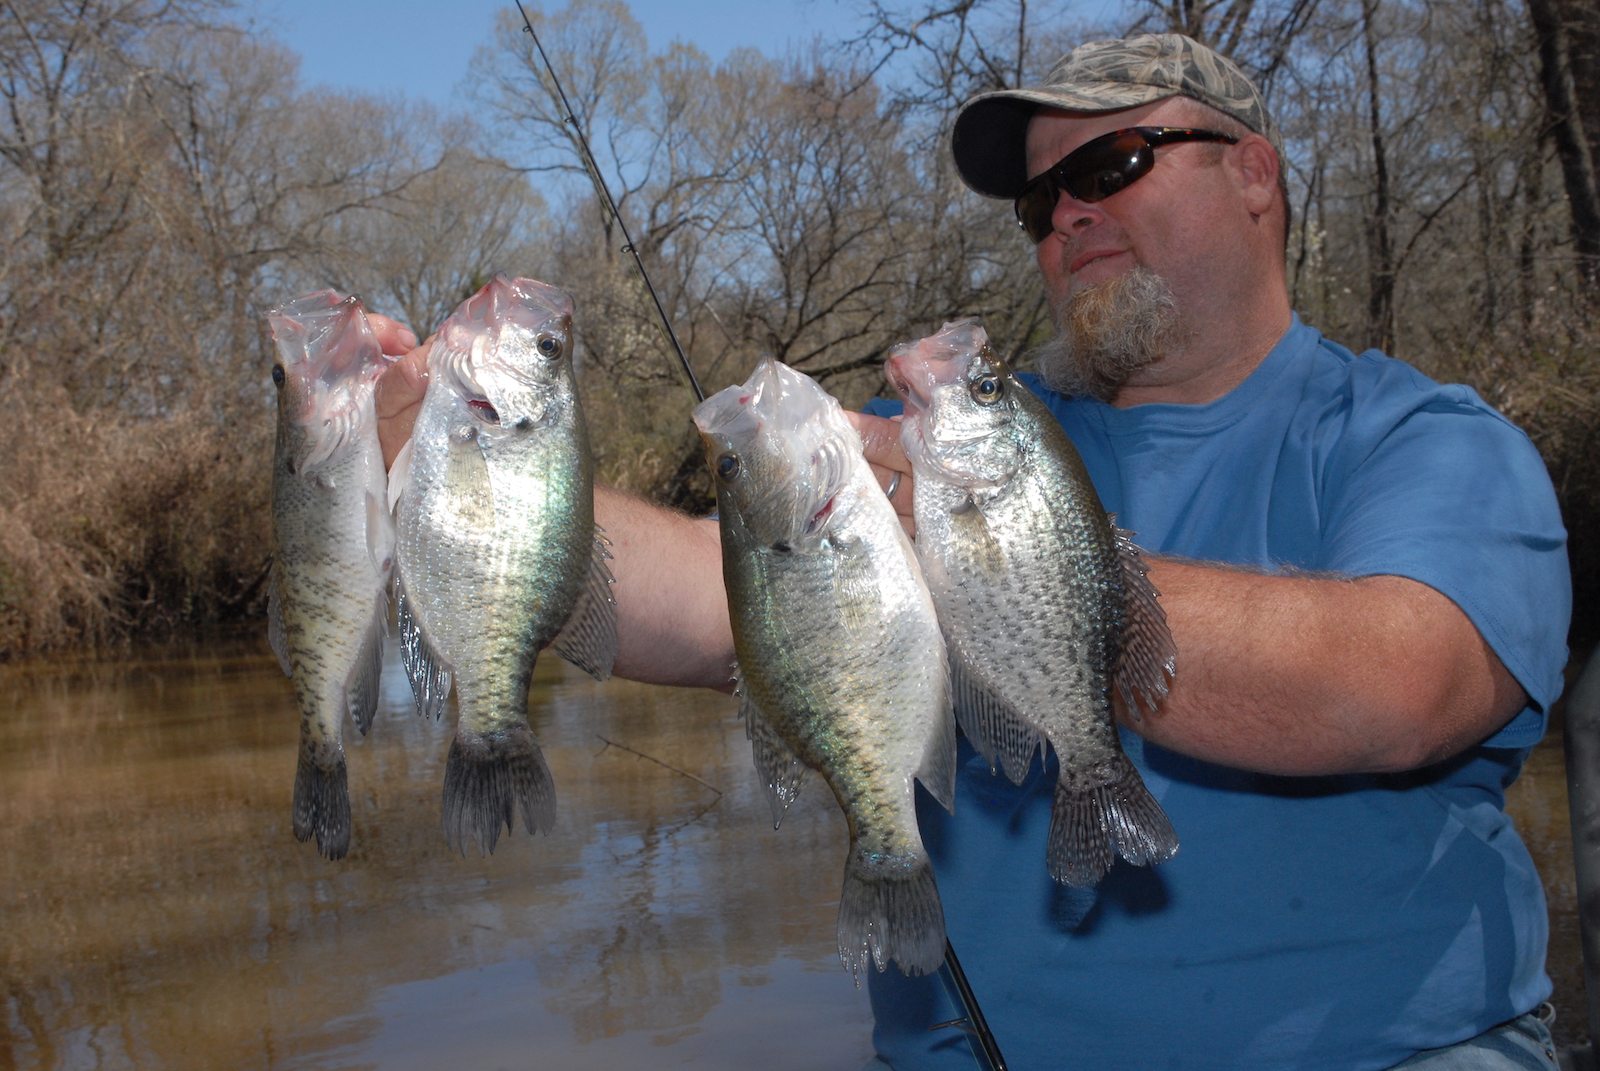 Ultimate Crappie jigs are the Texas Avocado with a walleye head